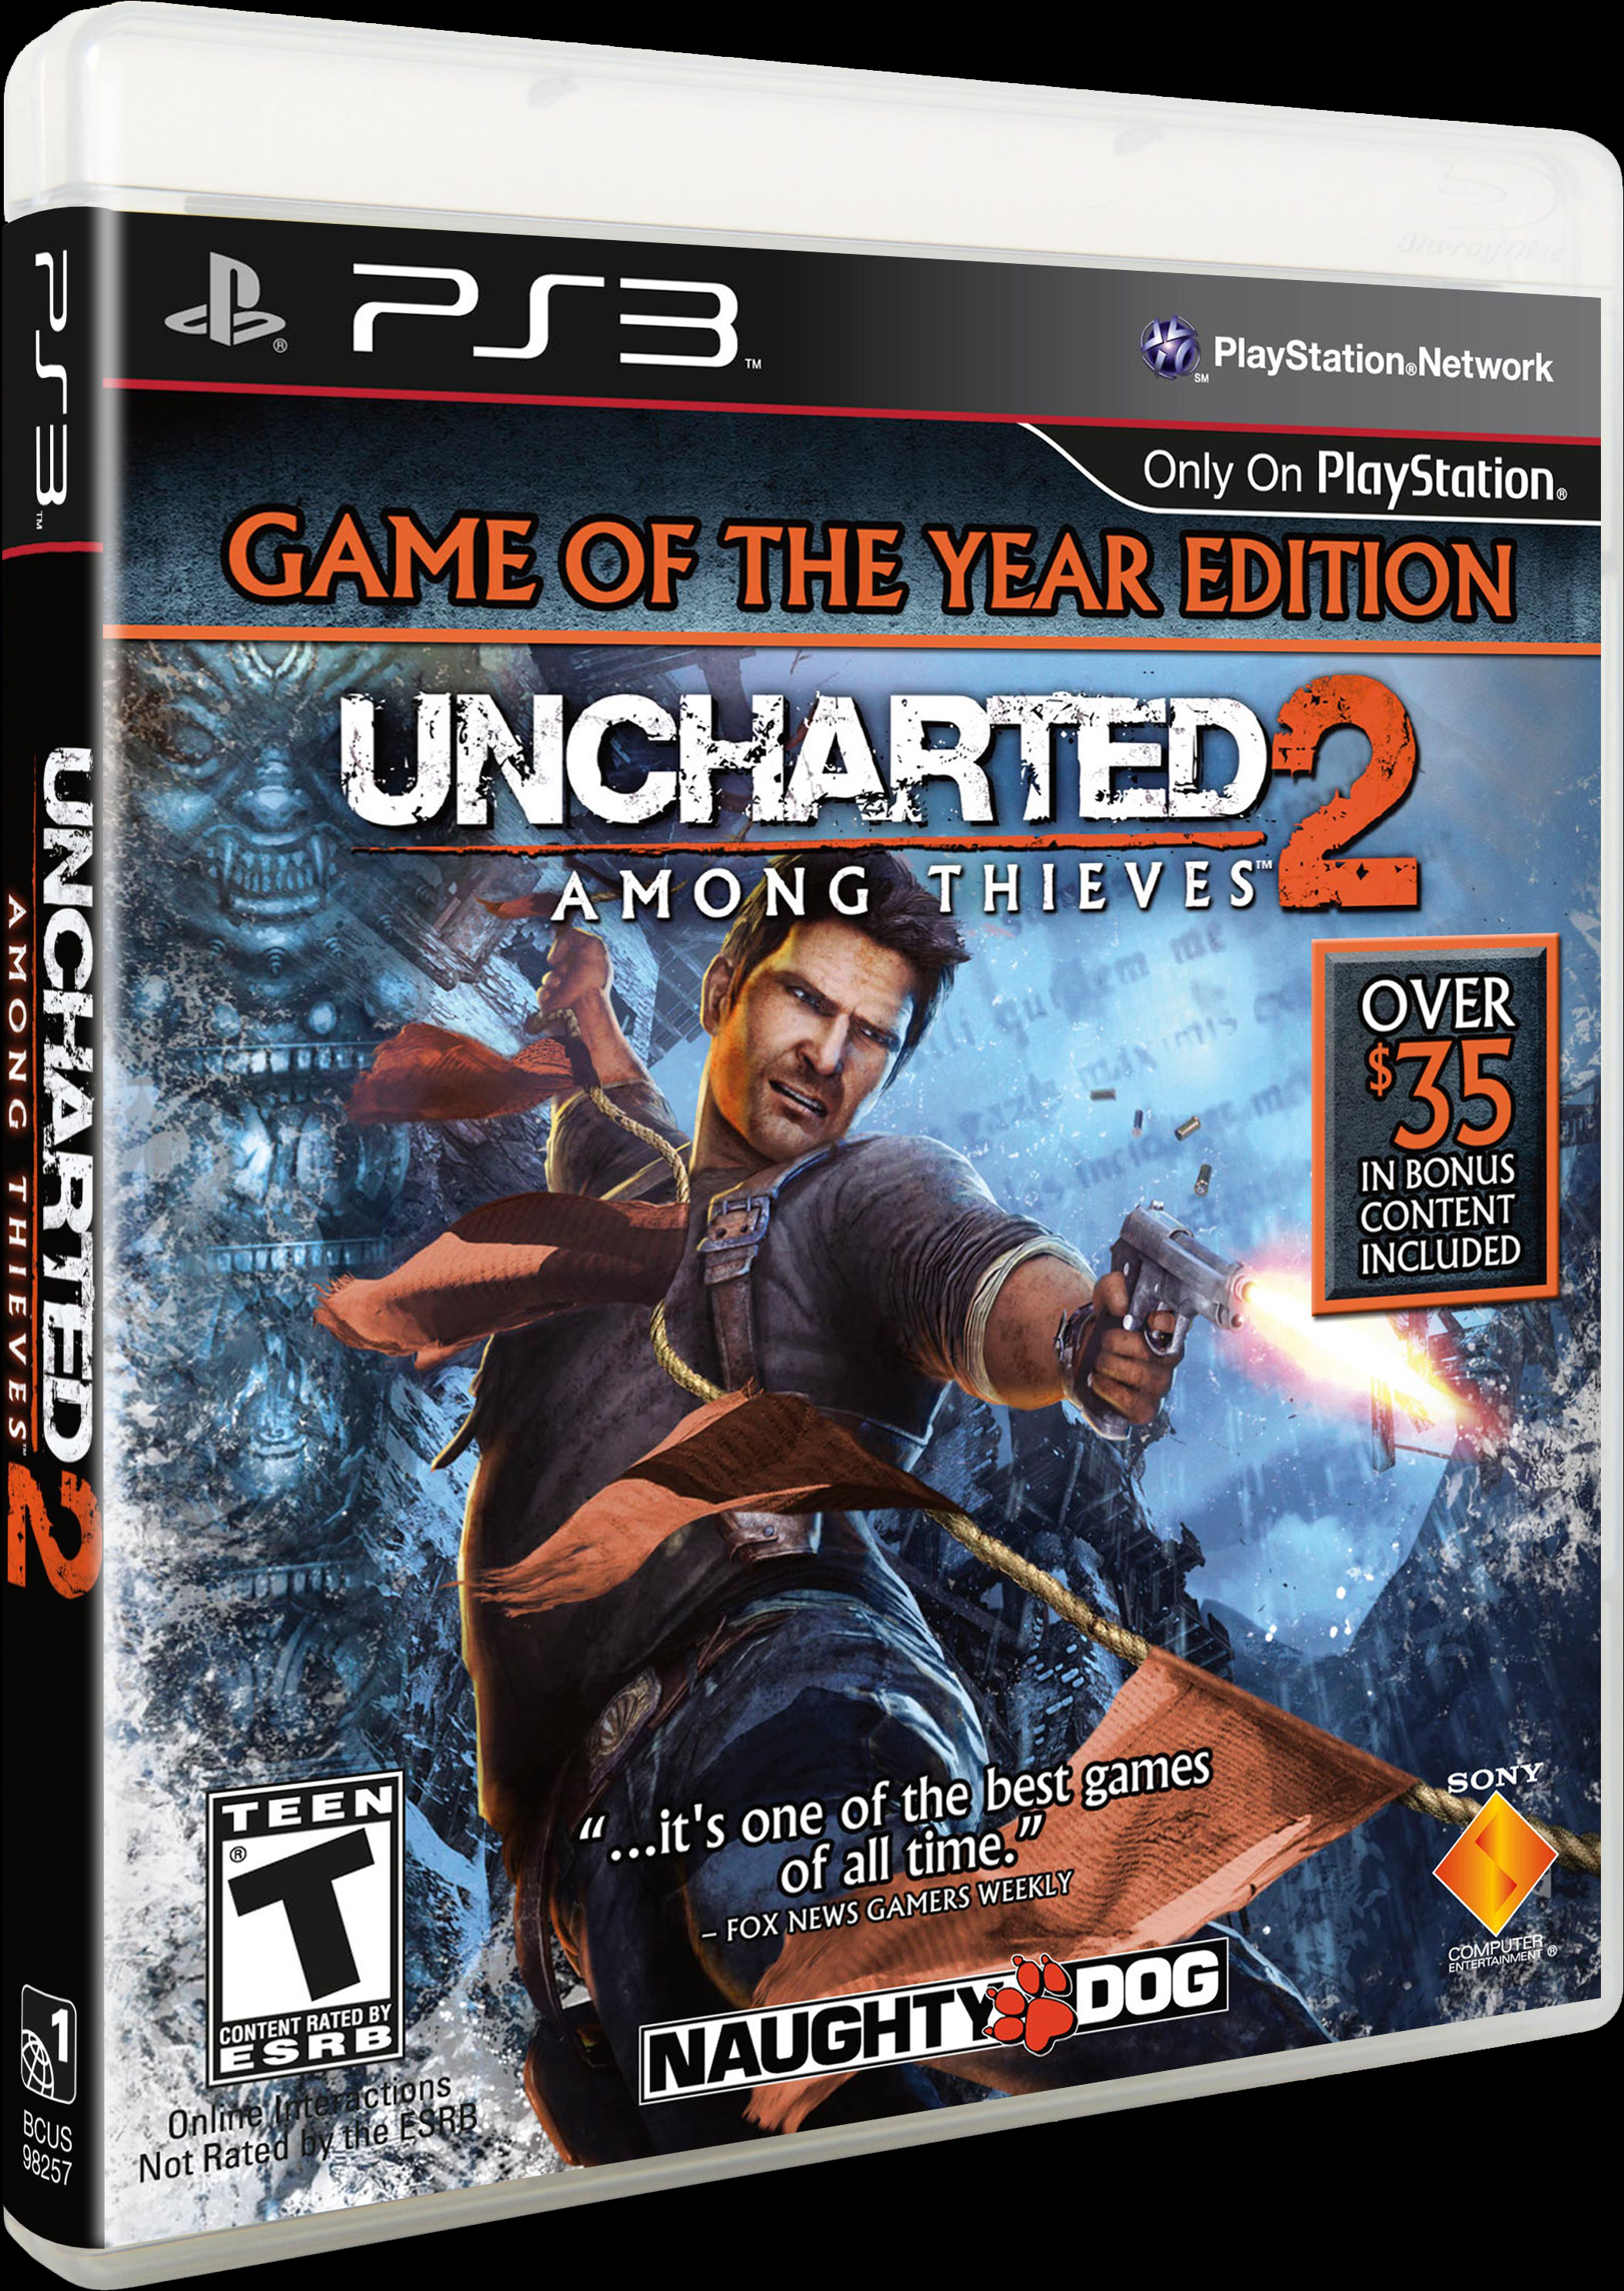 uncharted 2 pc version without survey